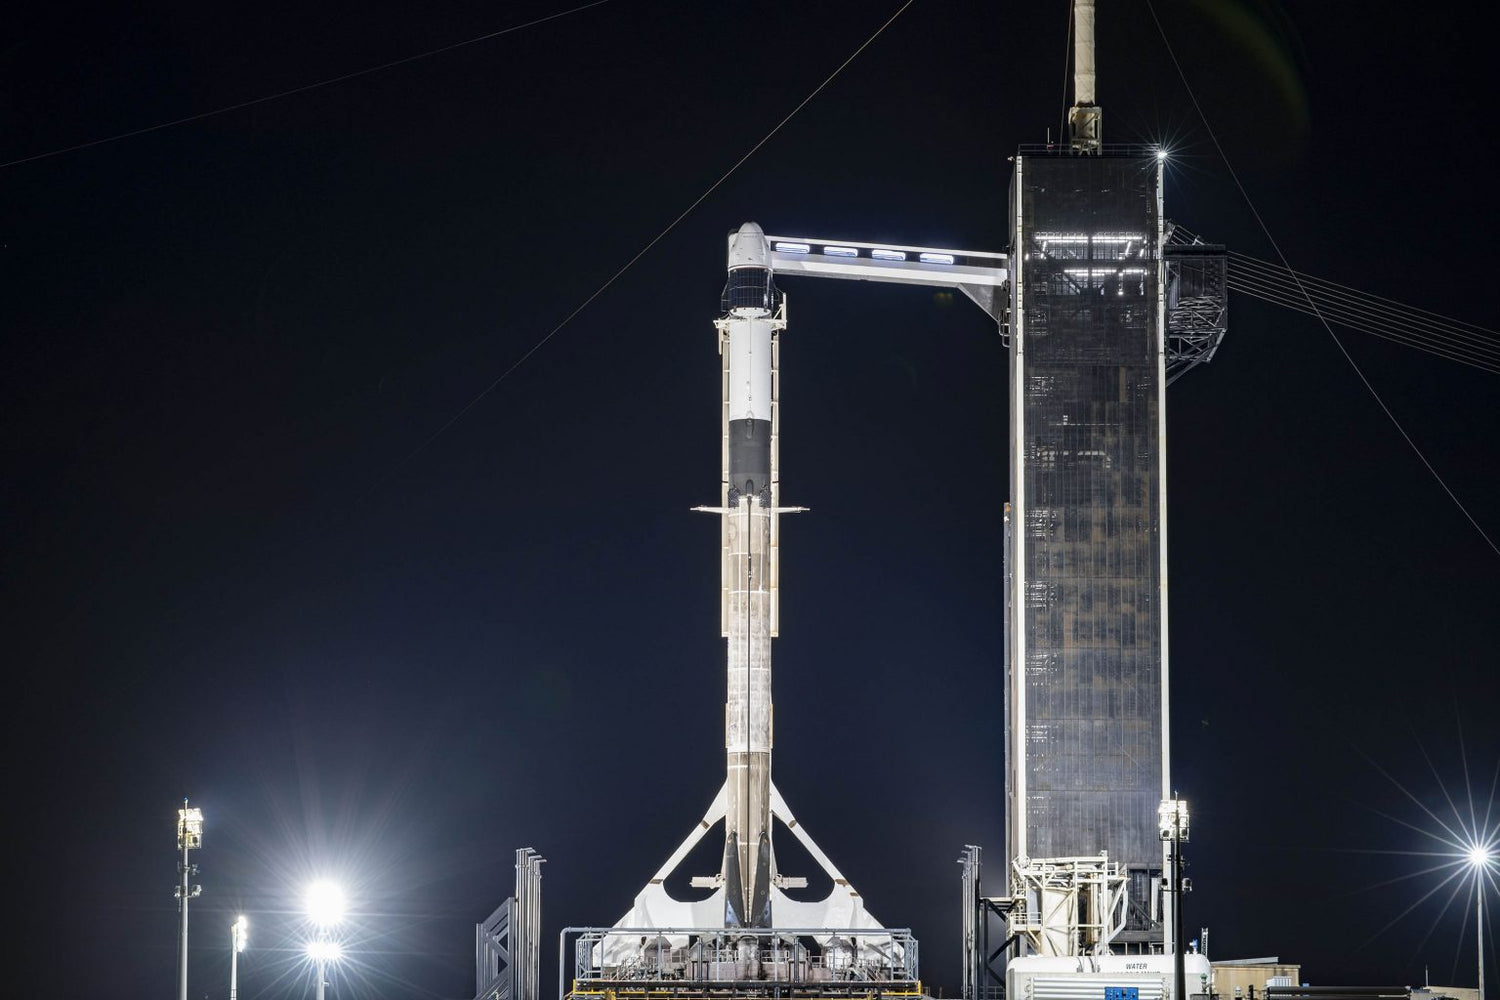 SpaceX will Reuse Historic Falcon 9 rocket that launched NASA Astronauts for upcoming Cargo Mission